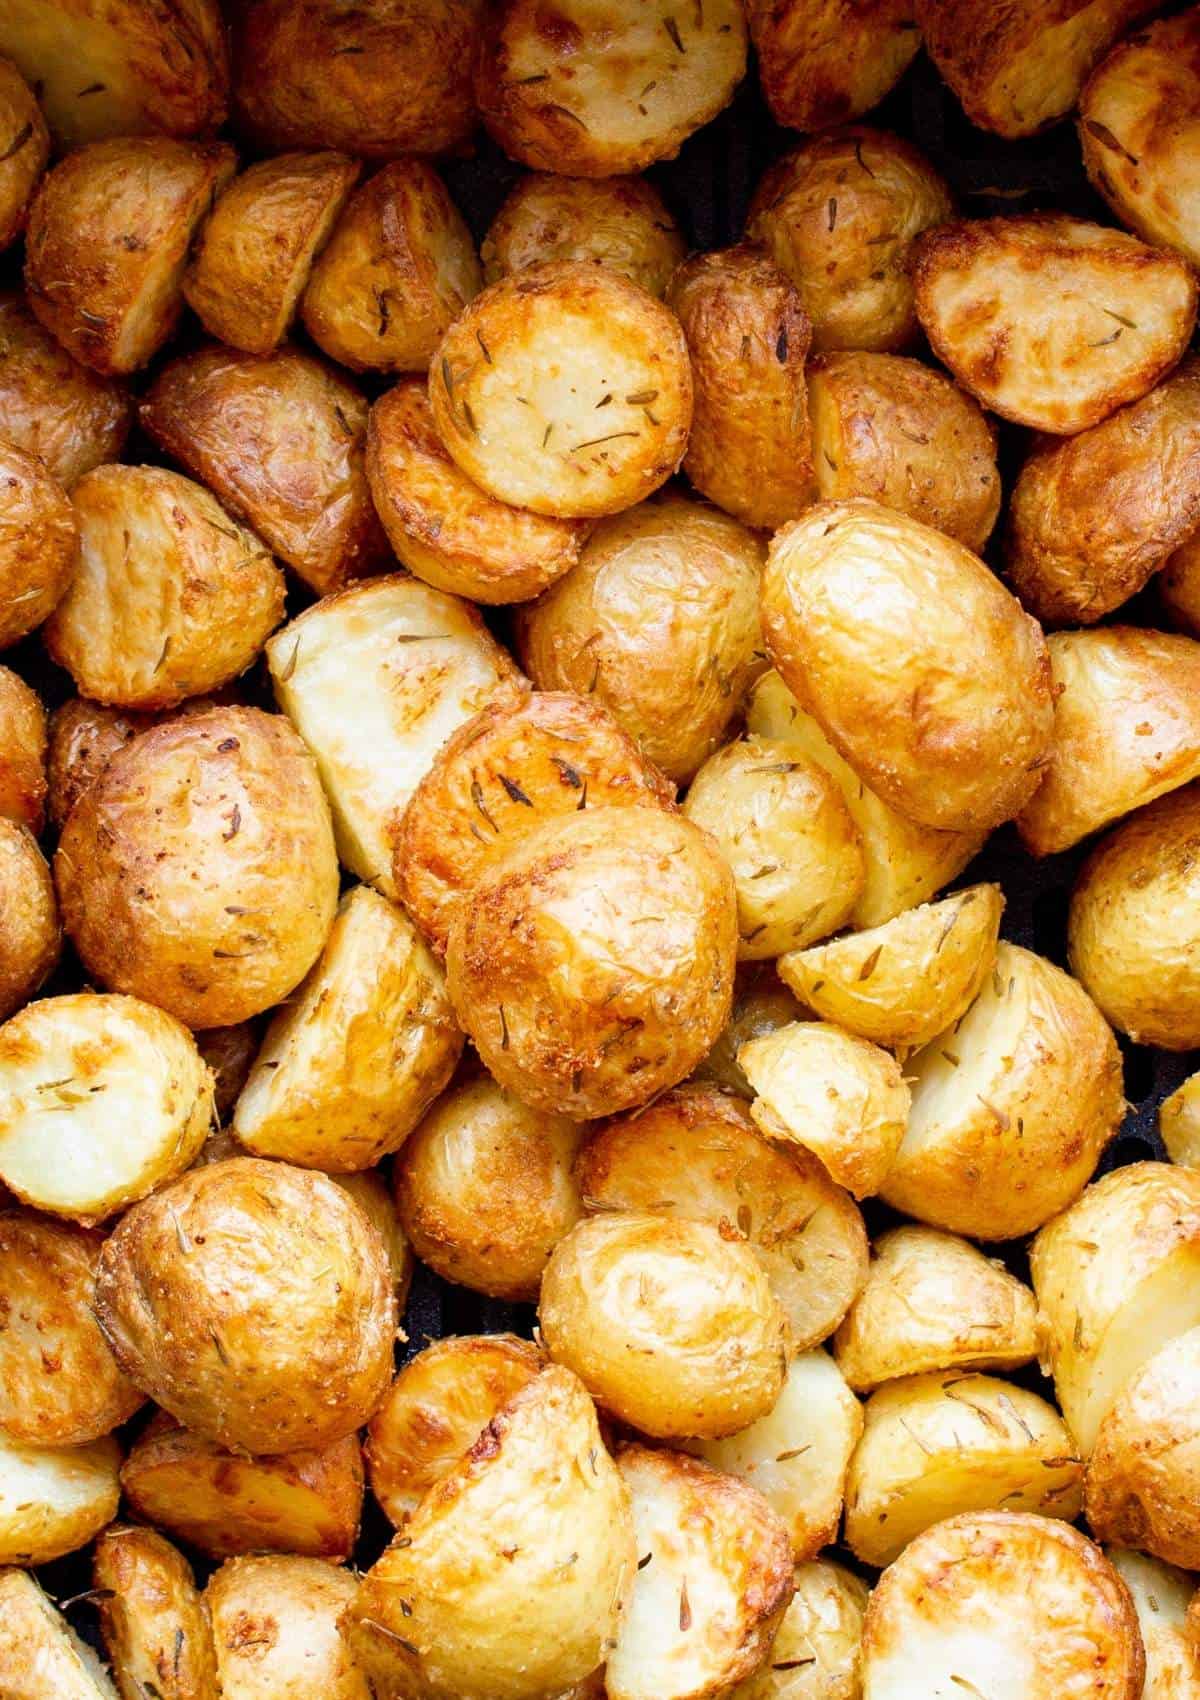 New potatoes baked in air fryer close up photo after cooking.